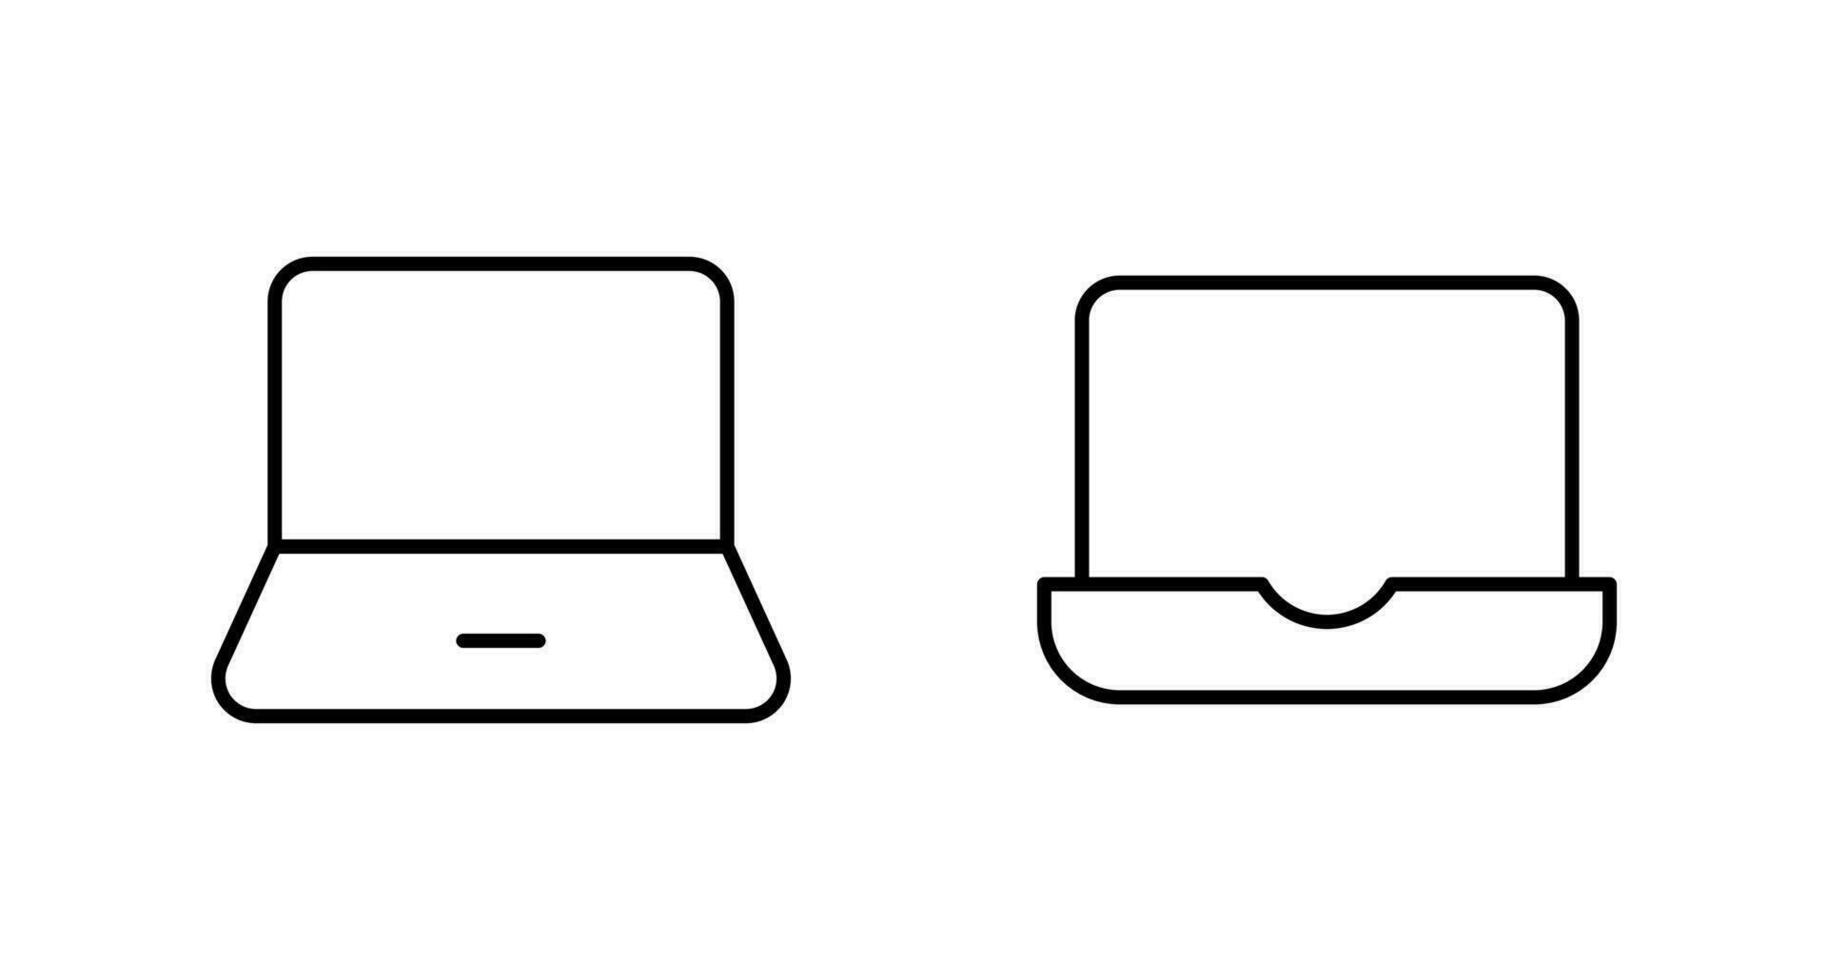 Laptop icons set. Laptop different style. collection of Laptops or notebook computer icon. Flat and line icon - stock vector. Can use for UI and mobile app, web site interface. vector